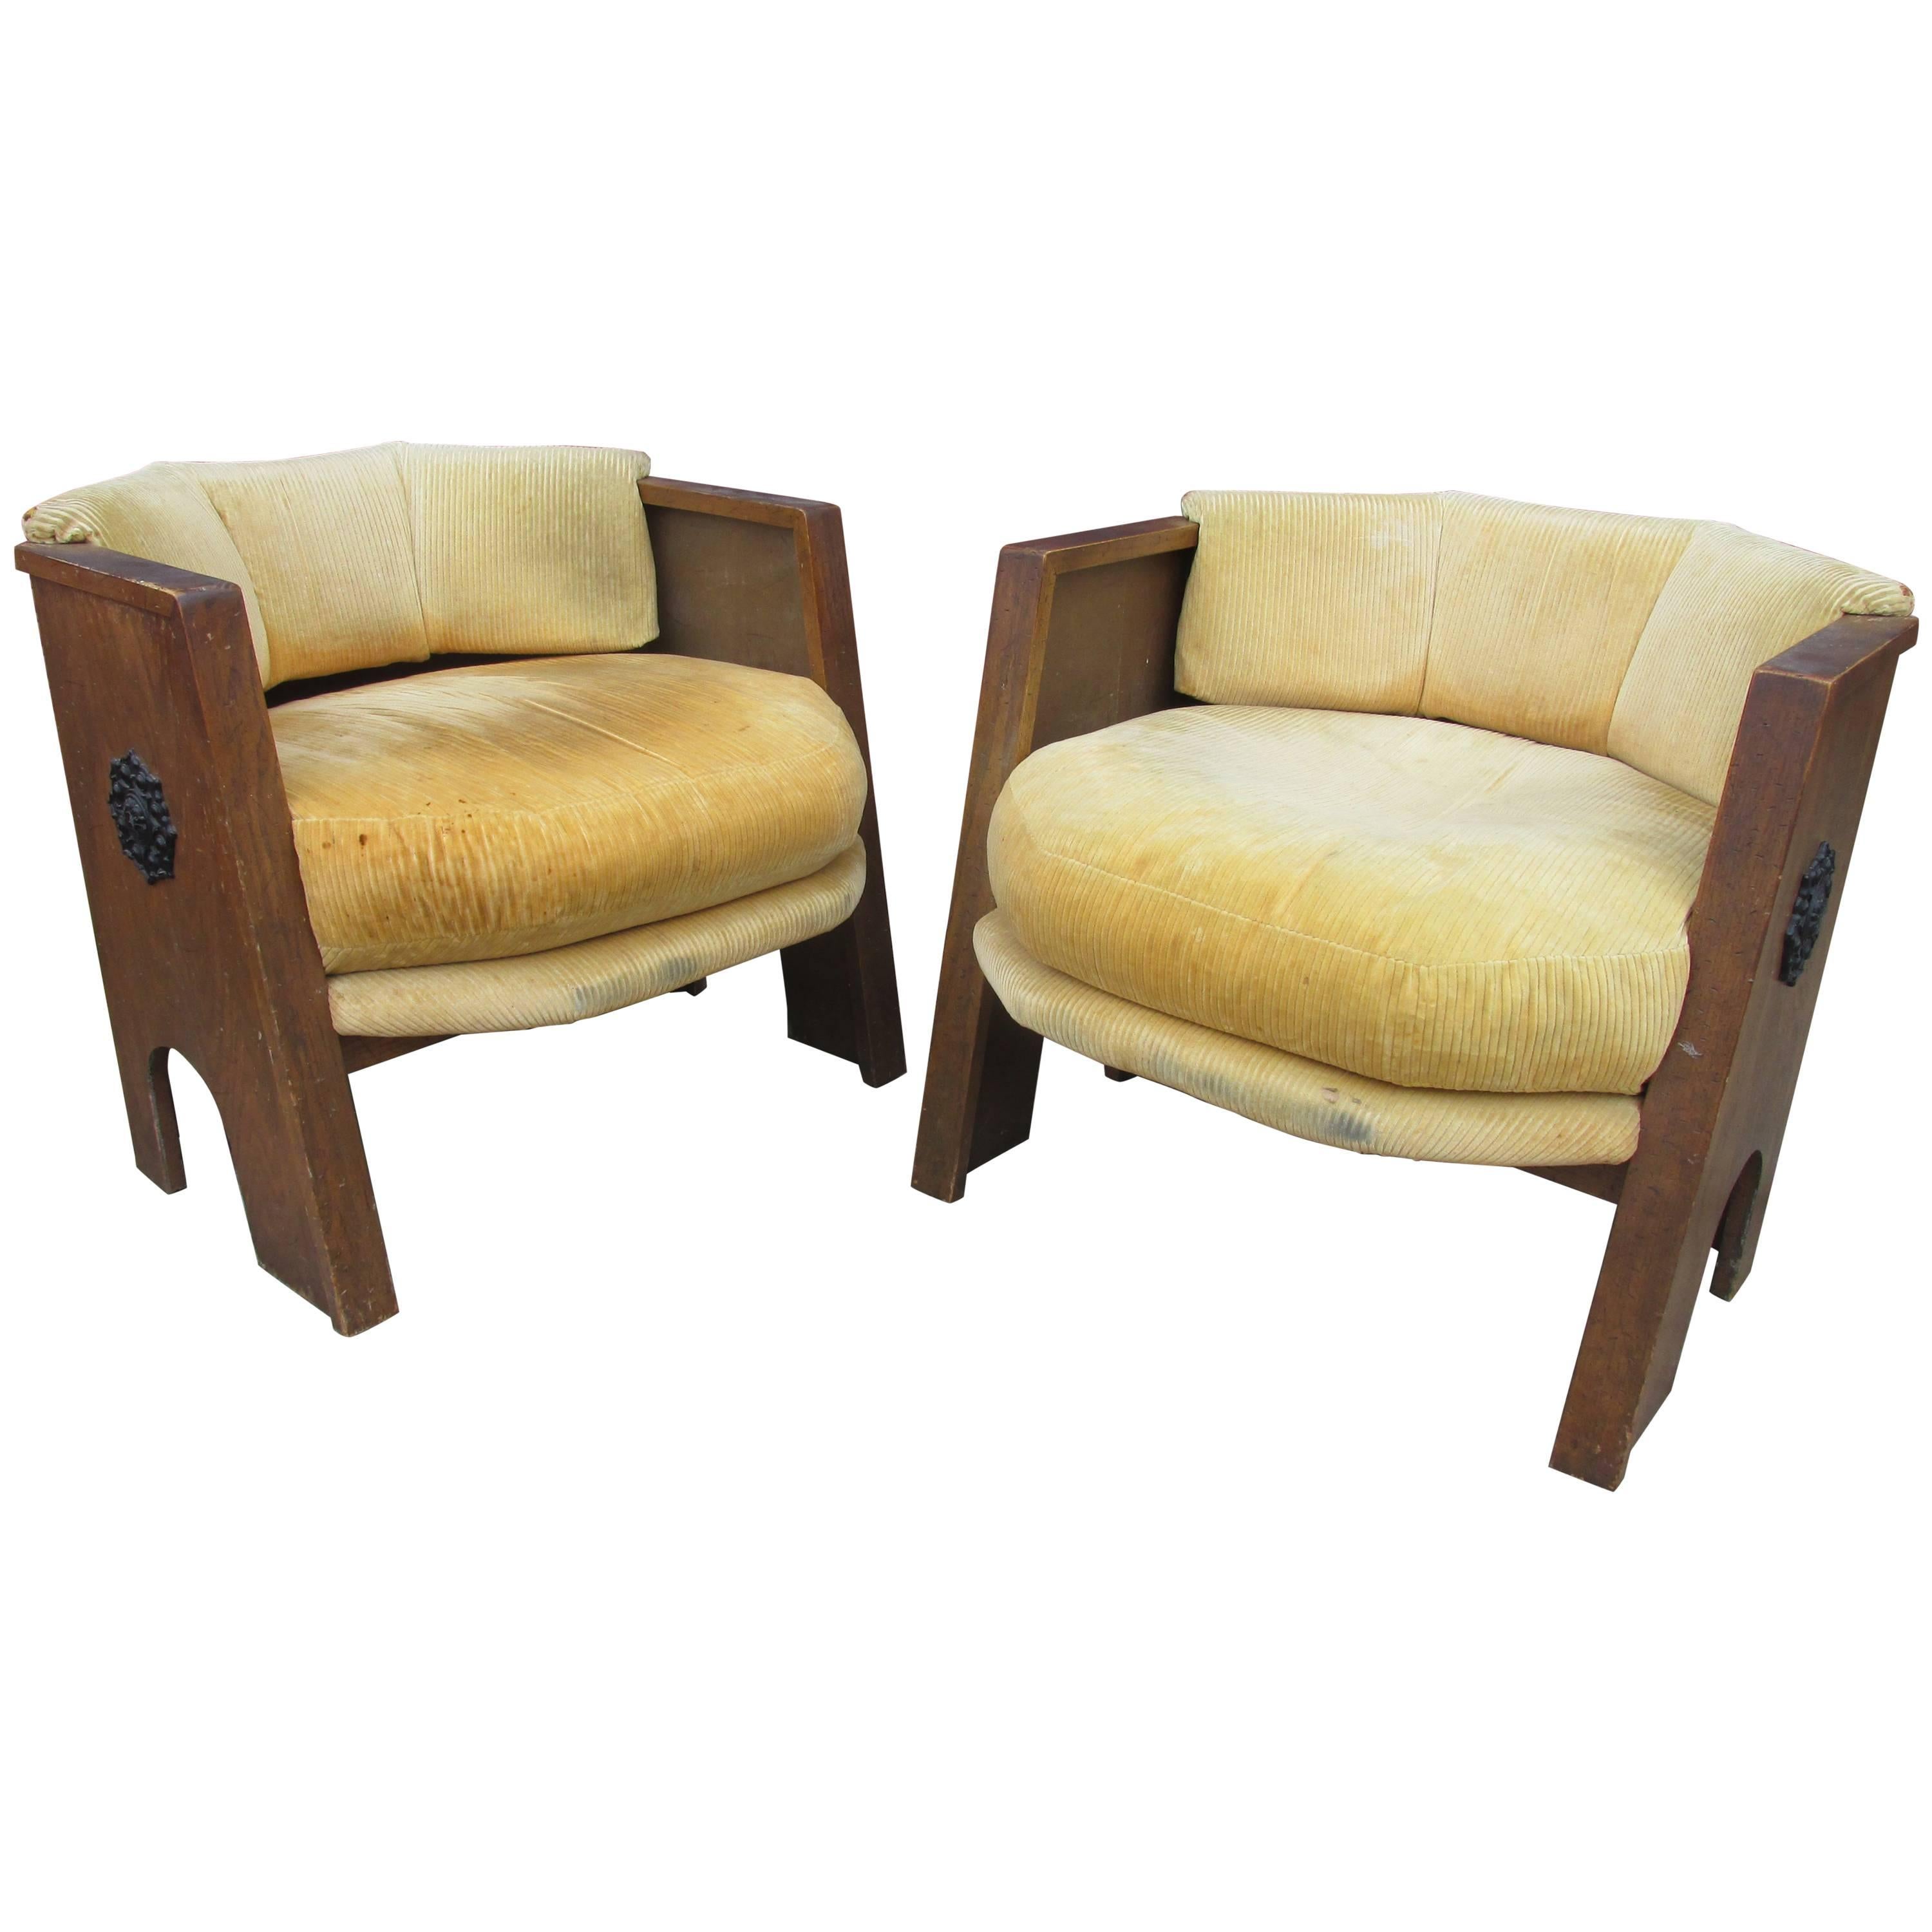 Adrian Pearsall for Craft Associates "Strictly Spanish" Pair of Octagonal Chairs